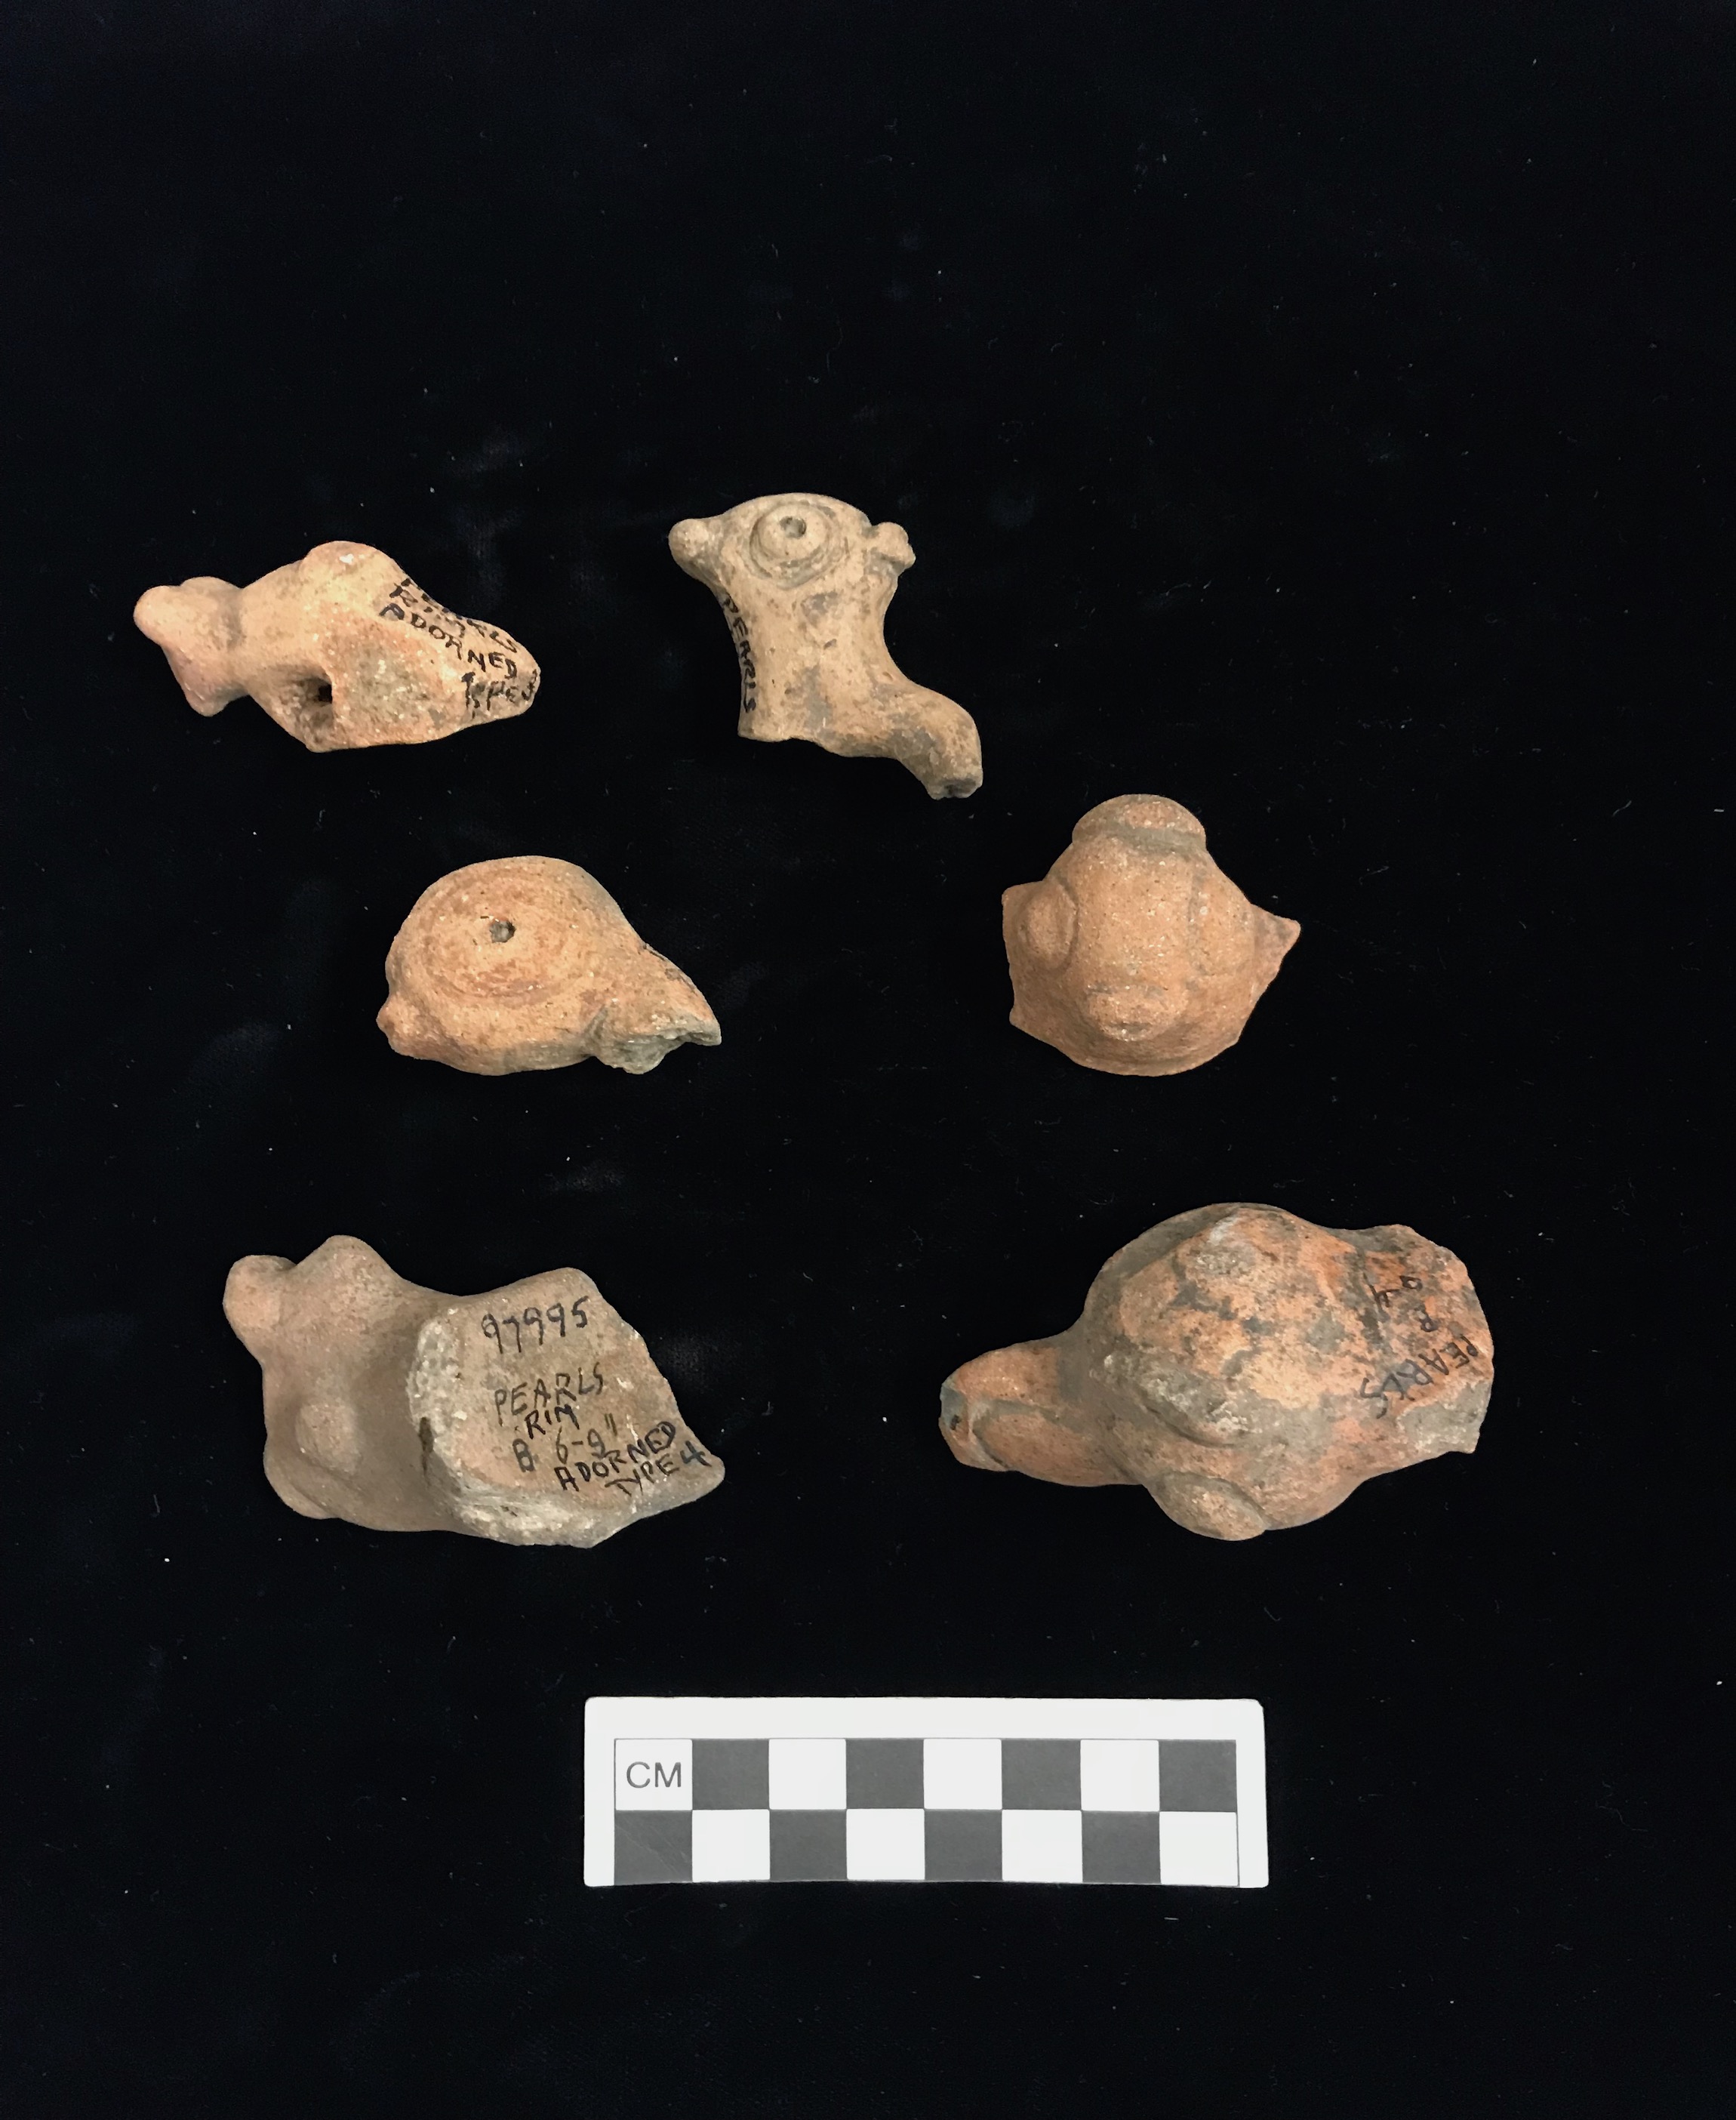 Plate IV. PEARLS RIM ADORNED SHERDS (Sub-types 3 and 4). FLMNH Acc. 97992, 97993, 97994, 97995, and 97996.